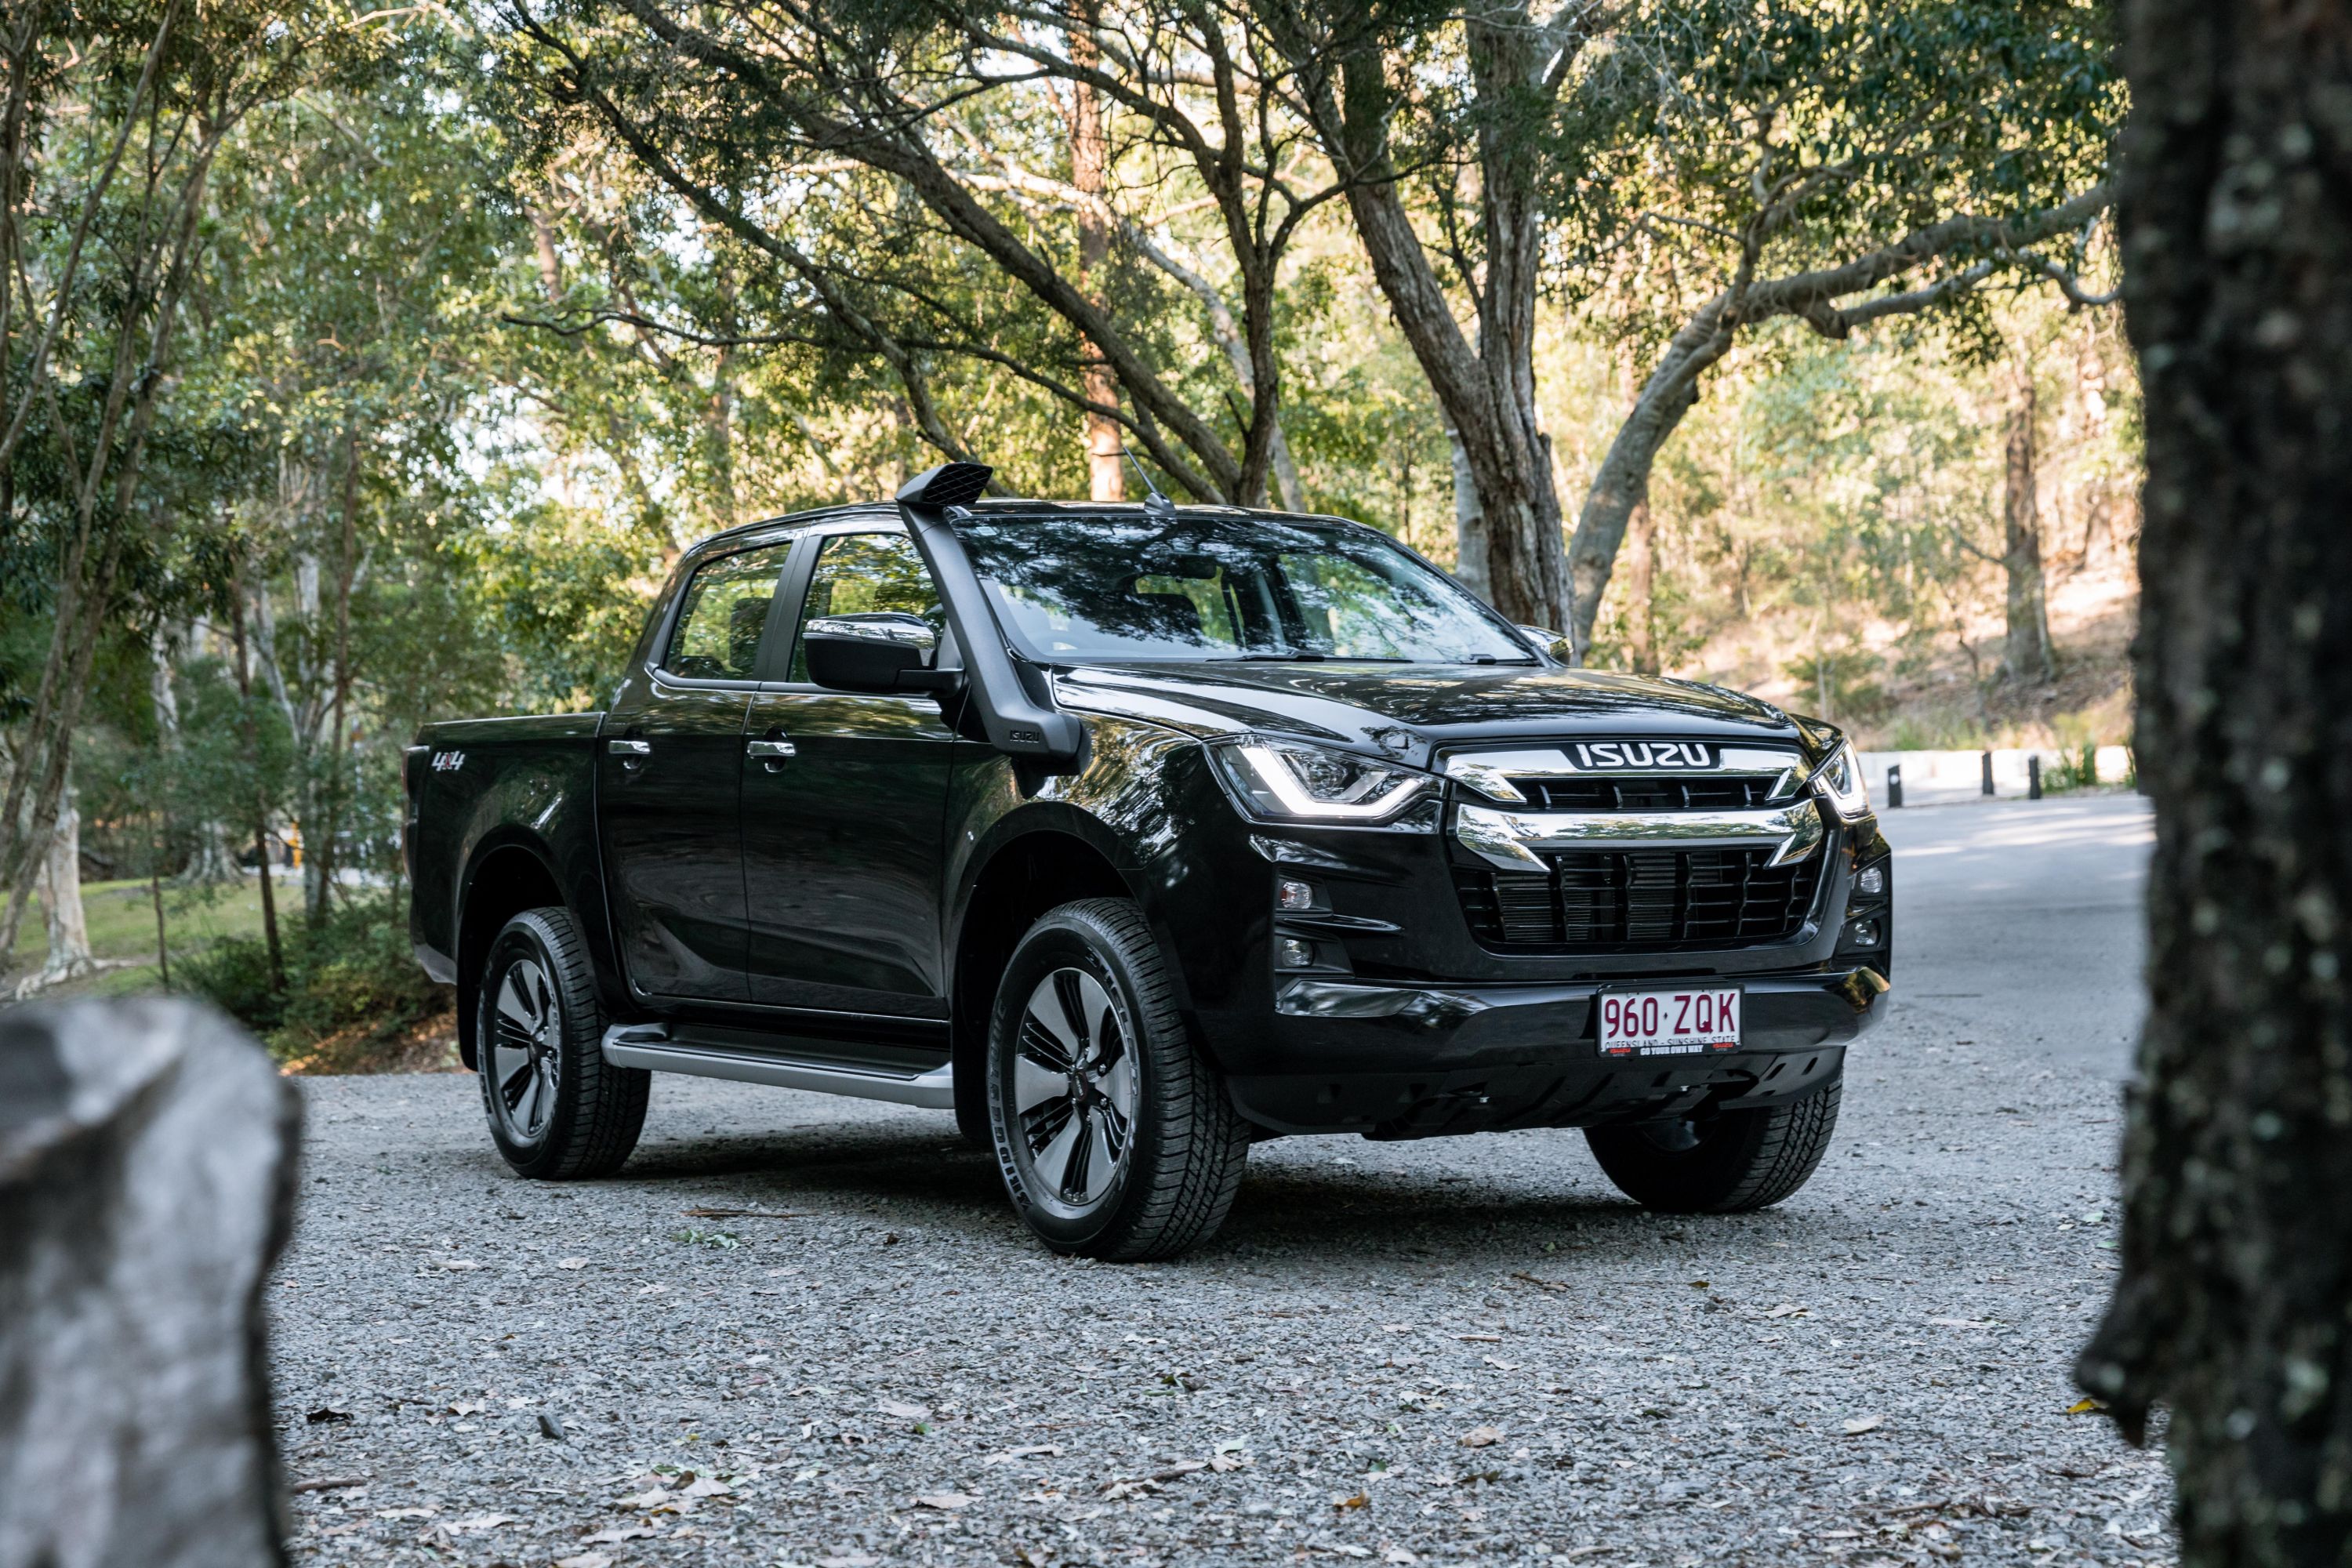 4x4 UTEs for sale in Melbourne